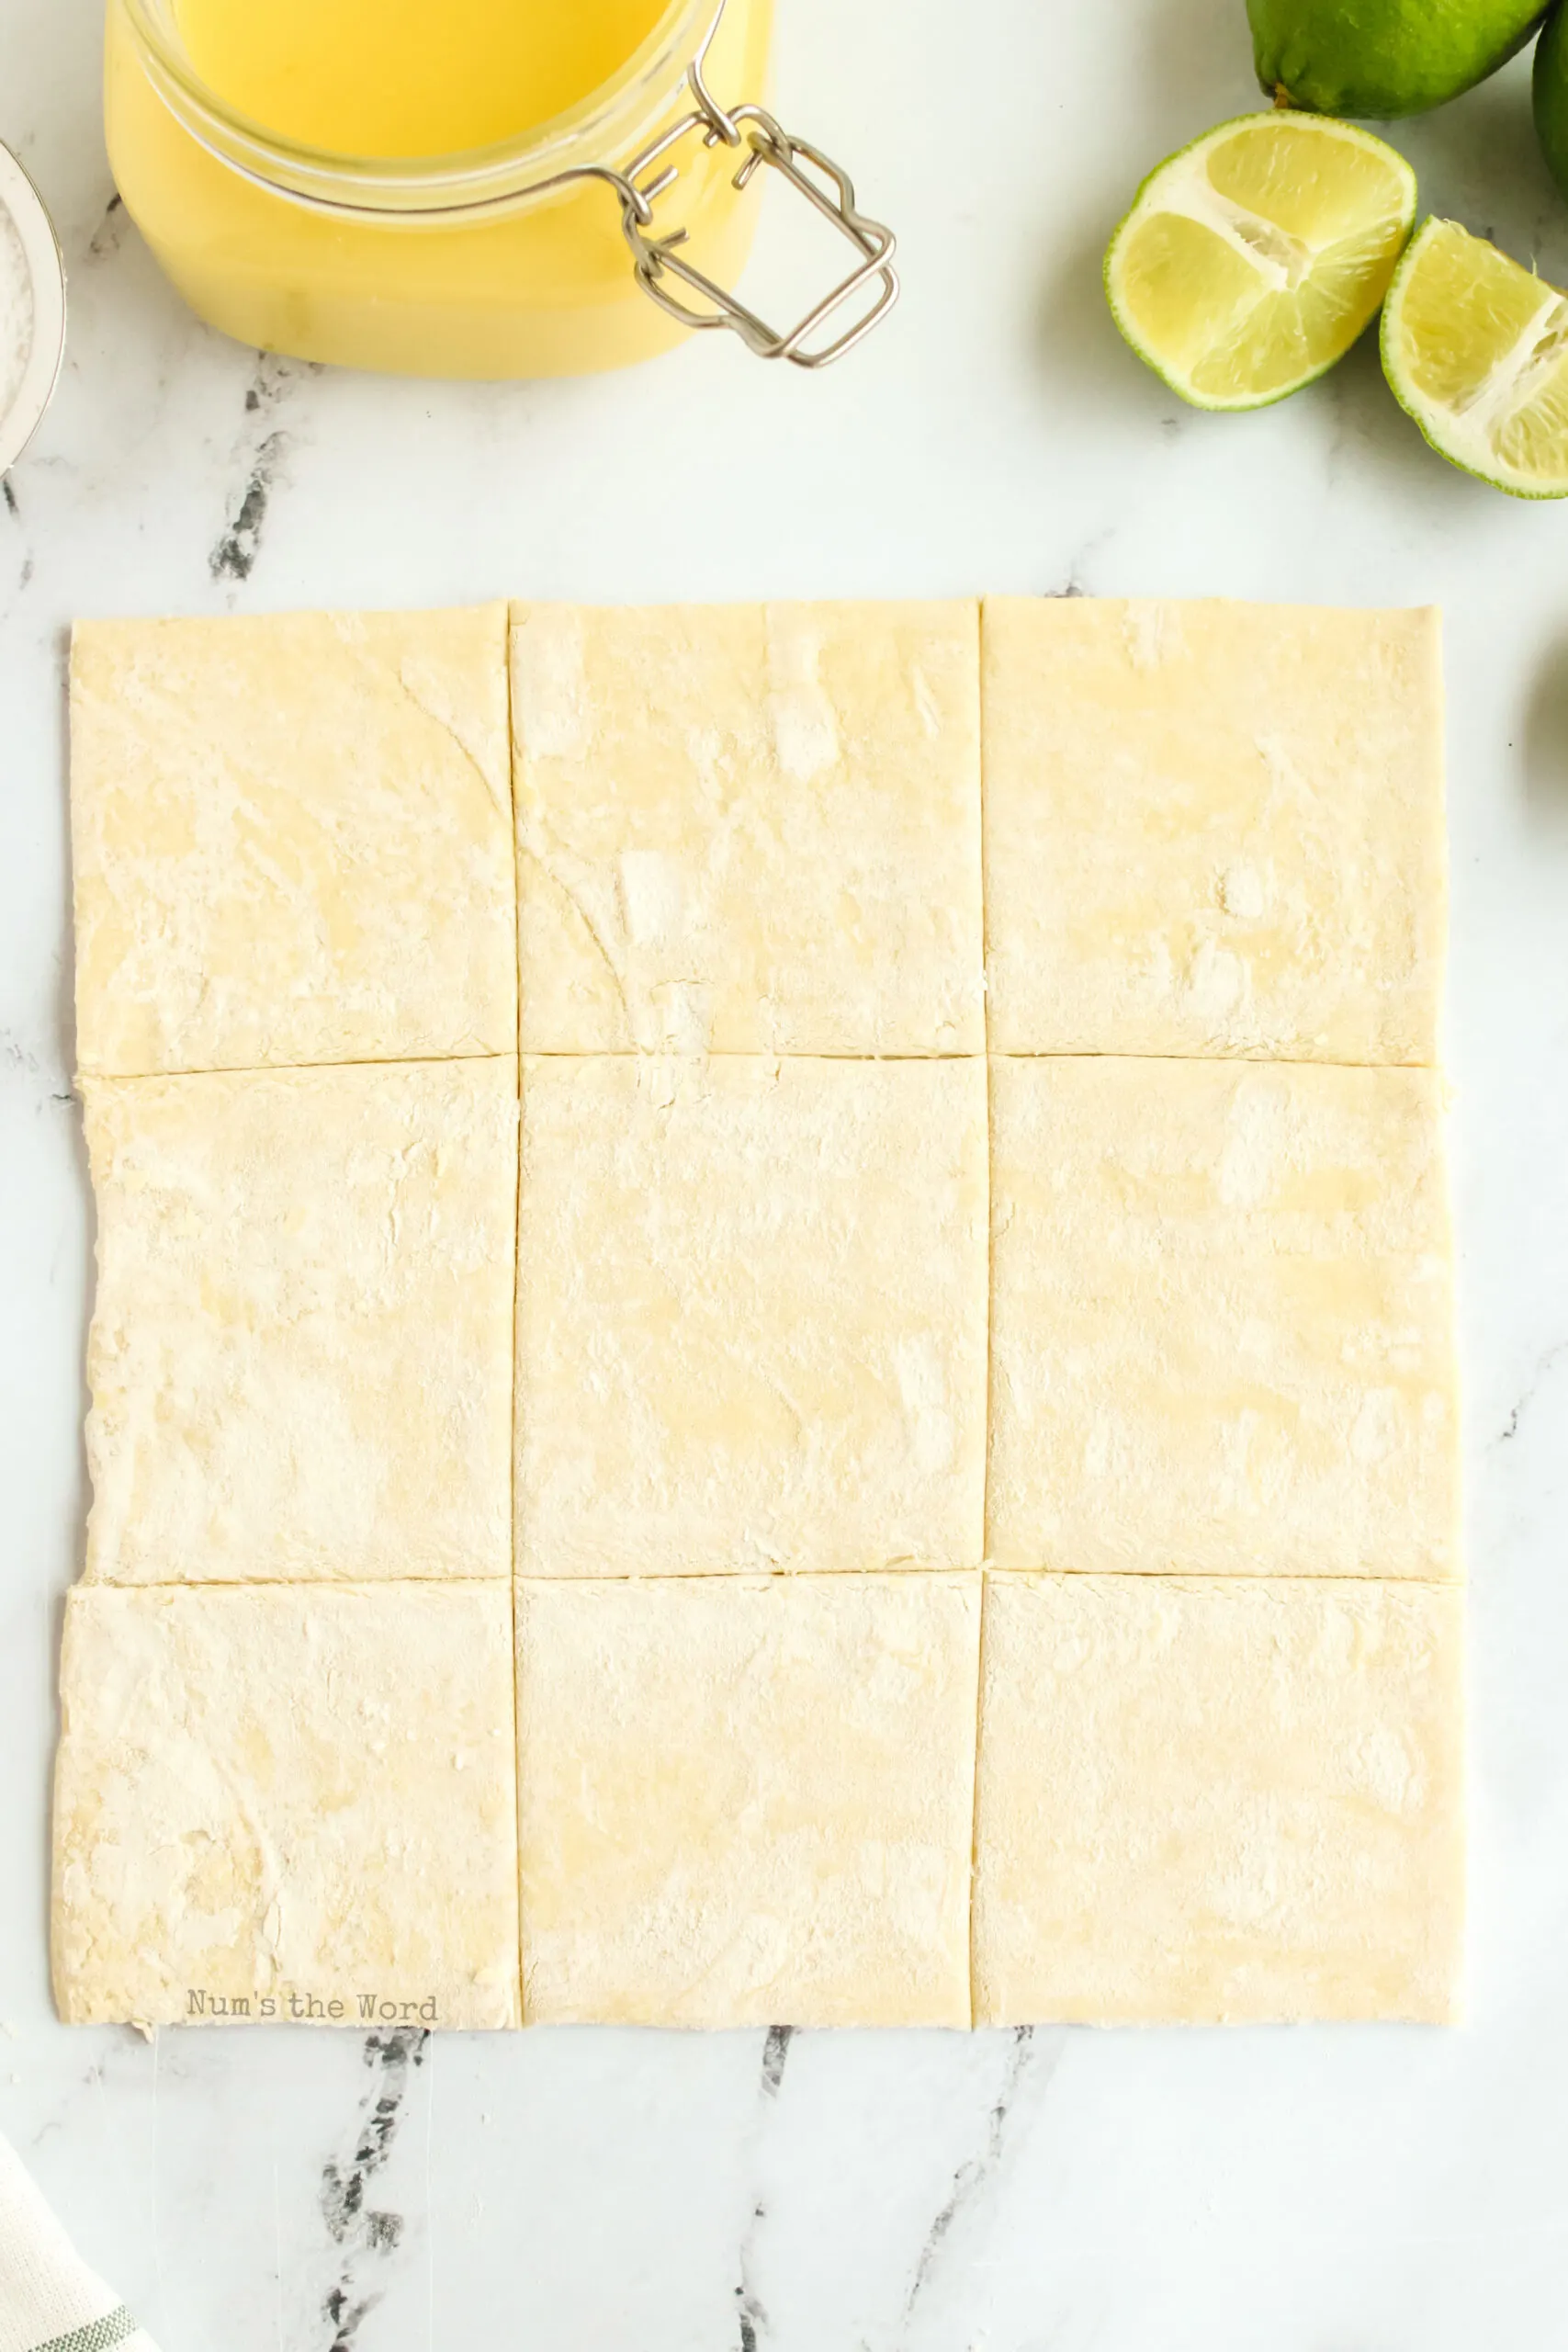 puff pastry sheet cut into 9 squares.